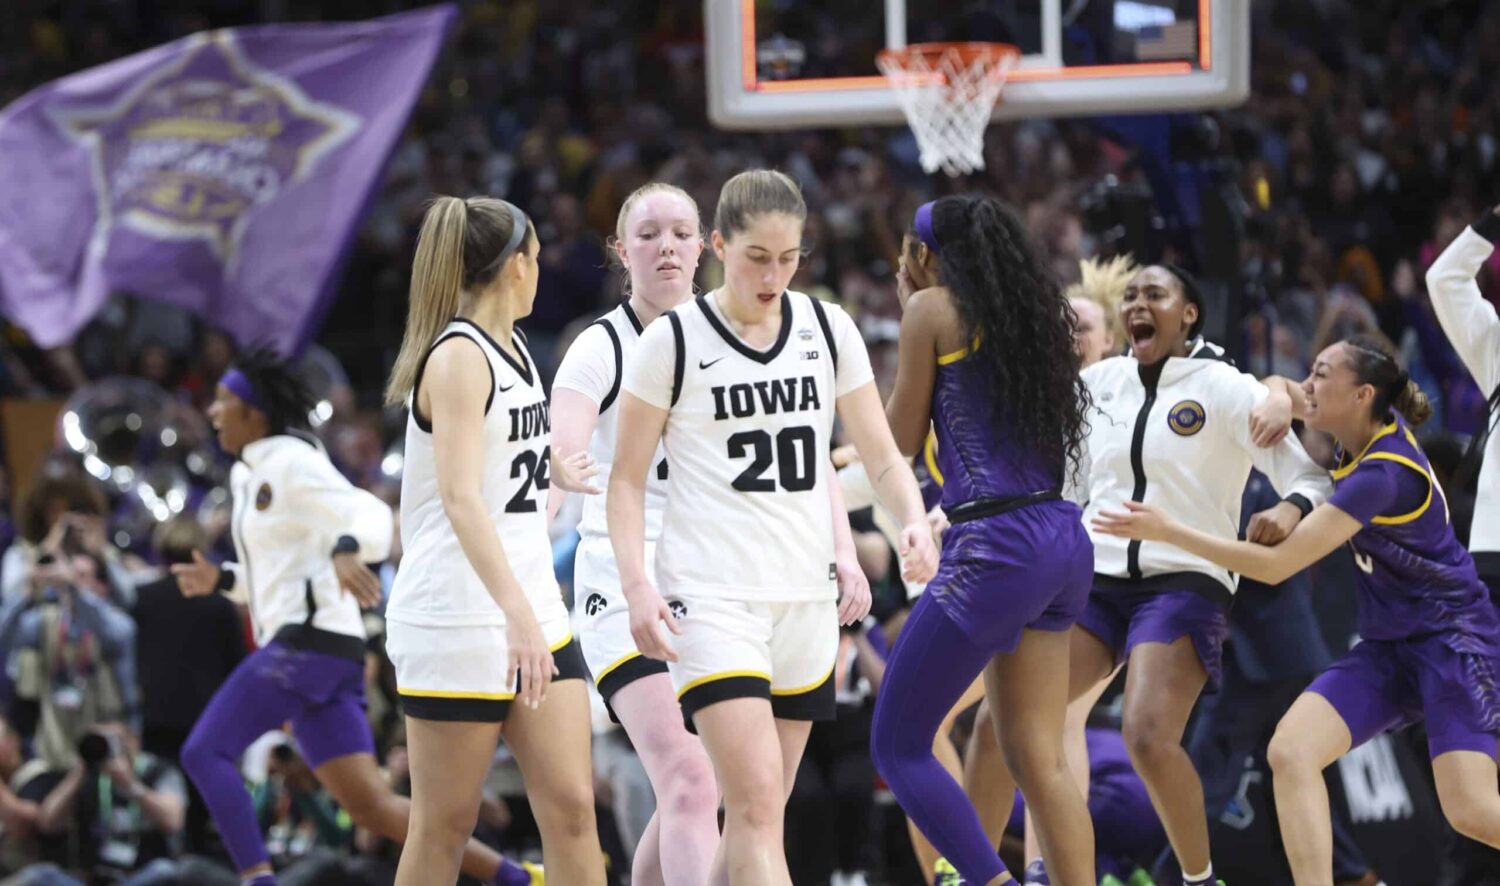 Iowa Hawkeyes players leave the court as LSU Lady Tigers players celebrate behind them after the game during the final round of the Women's Final Four NCAA tournament at the American Airlines Center.